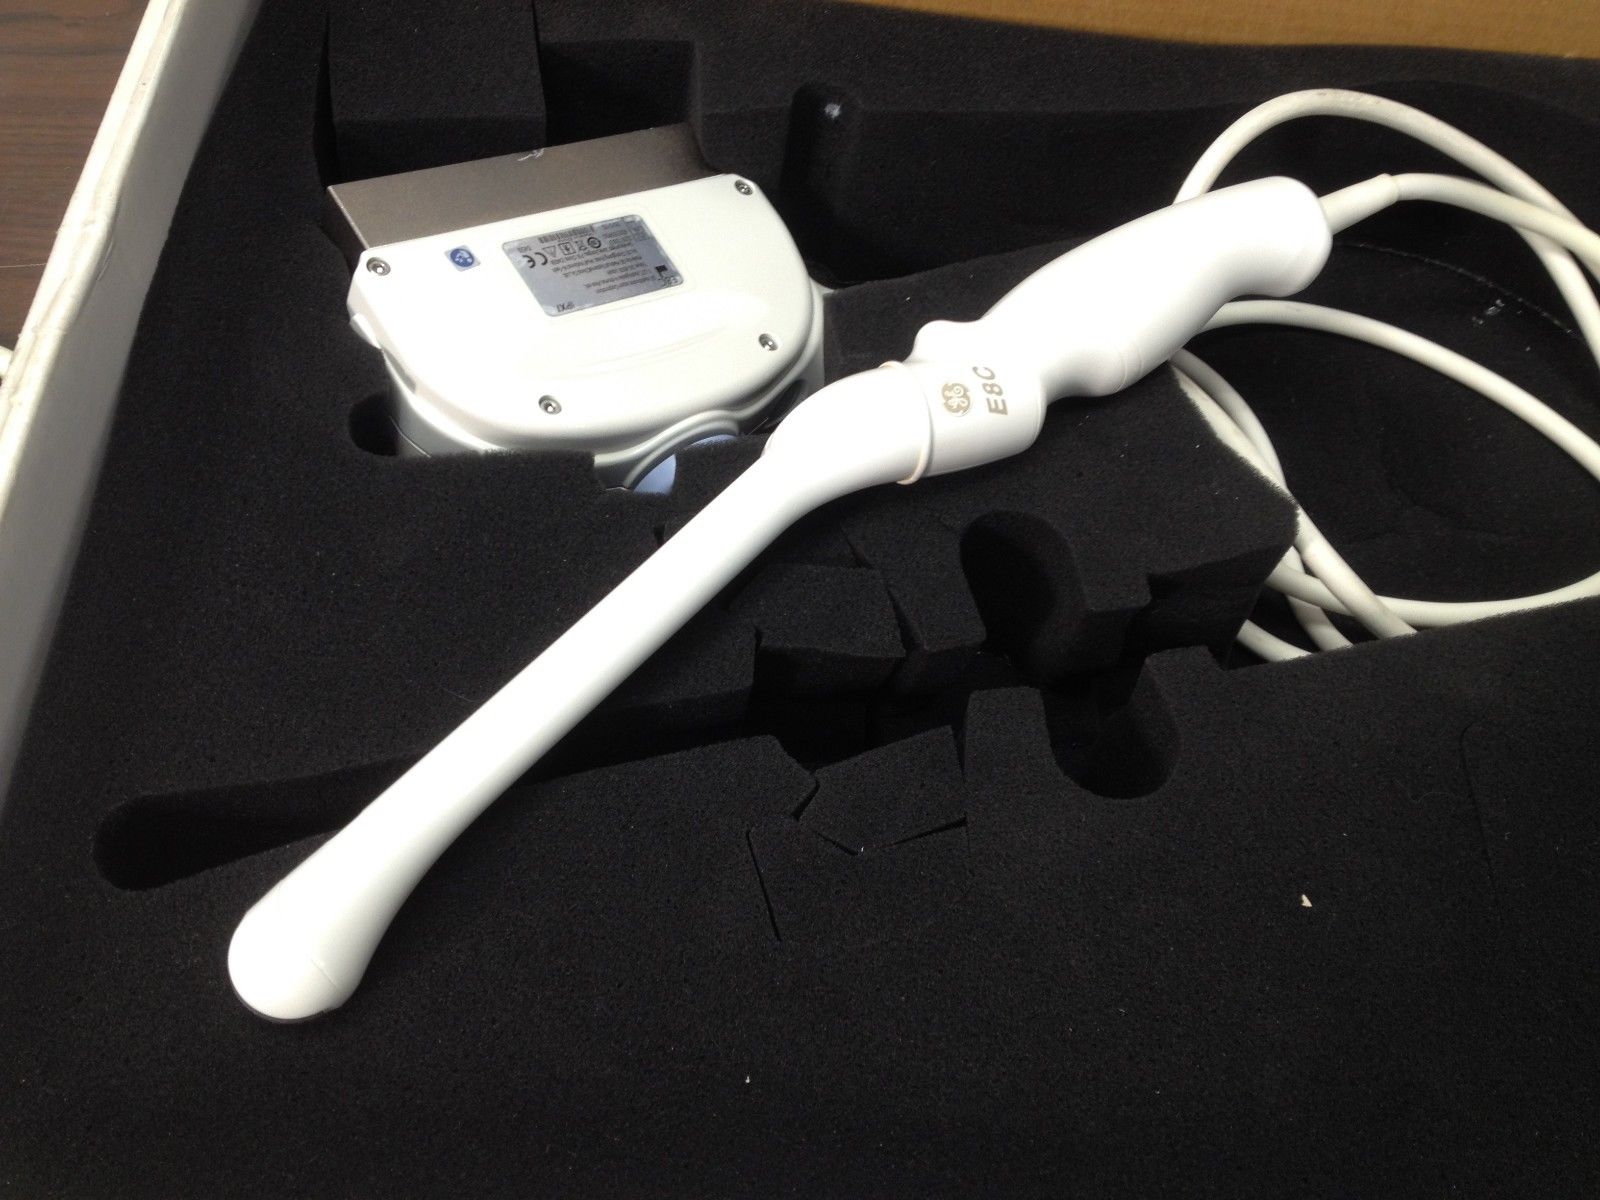 3x Vaginal Probe GE E8C Endocavity Medical Transducer for Obstetrics Gynecology DIAGNOSTIC ULTRASOUND MACHINES FOR SALE